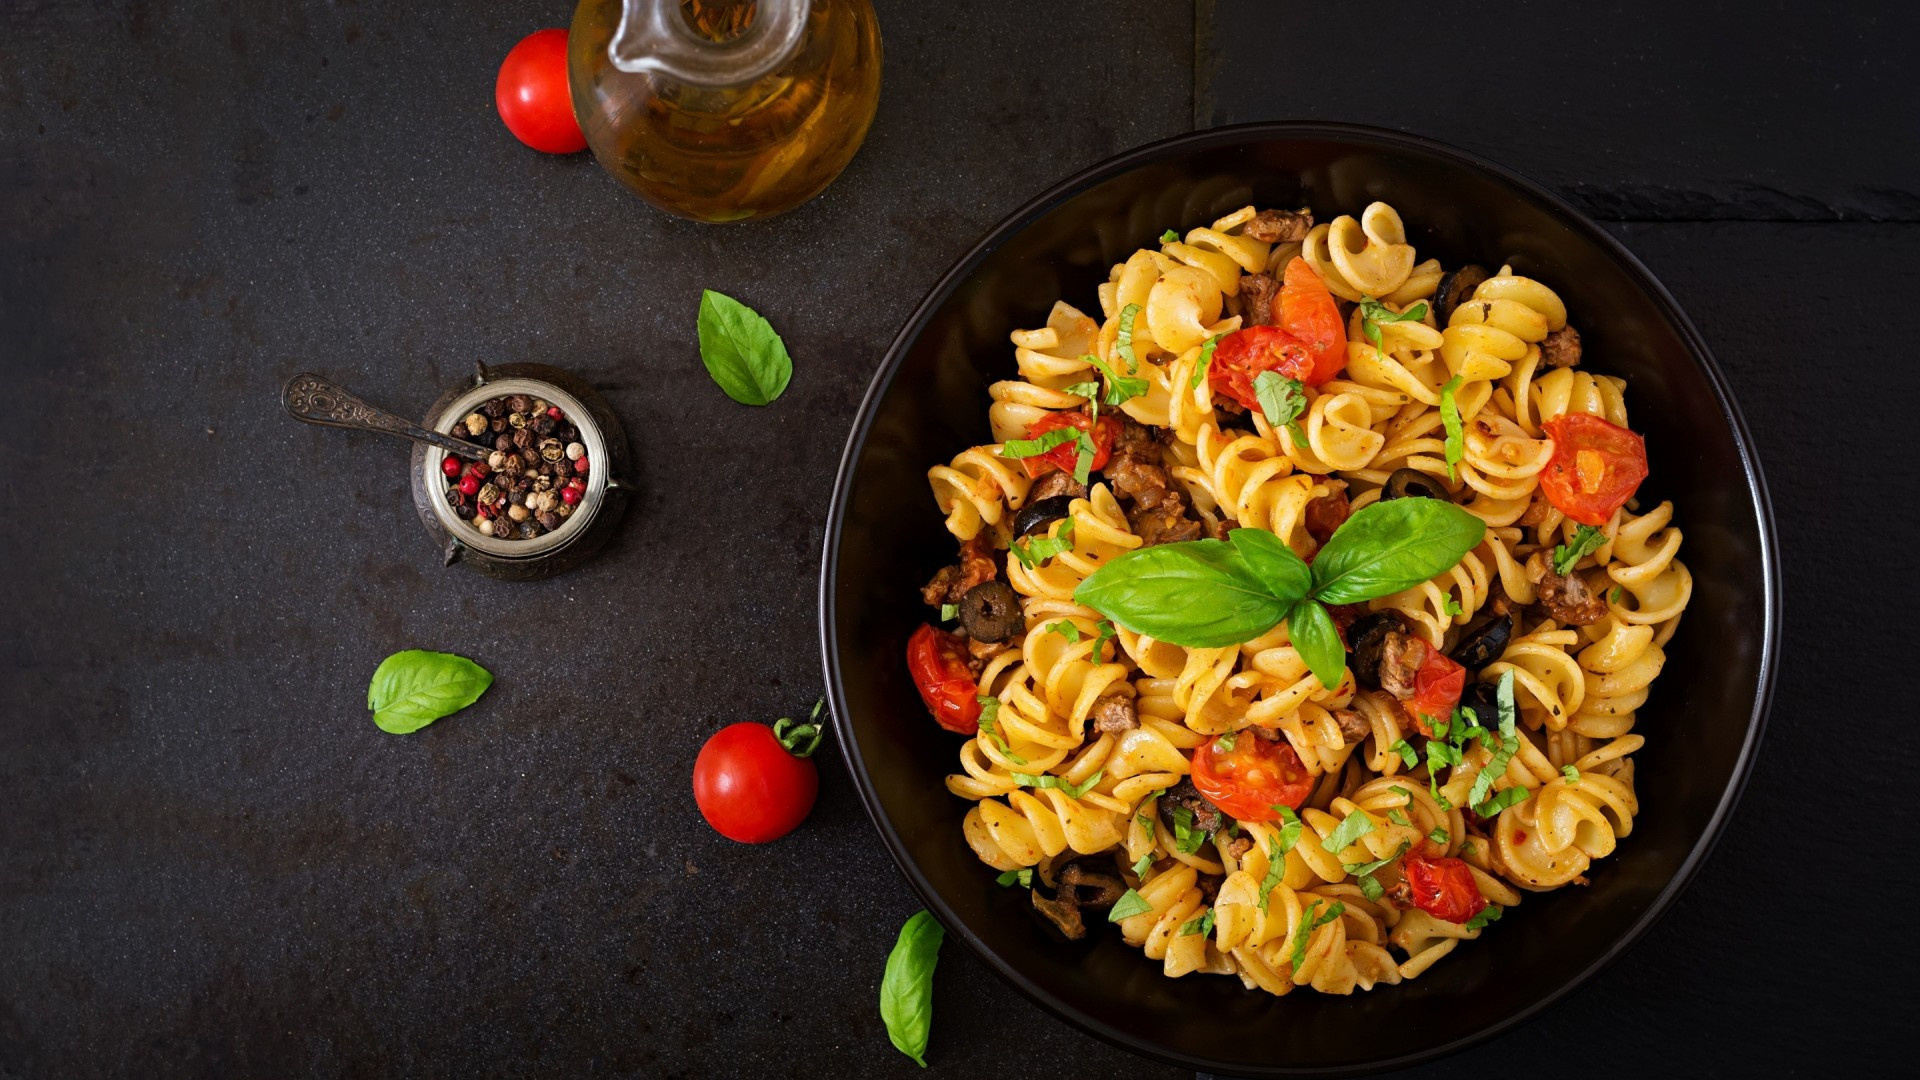 Pasta: A good source of carbohydrates and provides energy for the body. 1920x1080 Full HD Wallpaper.